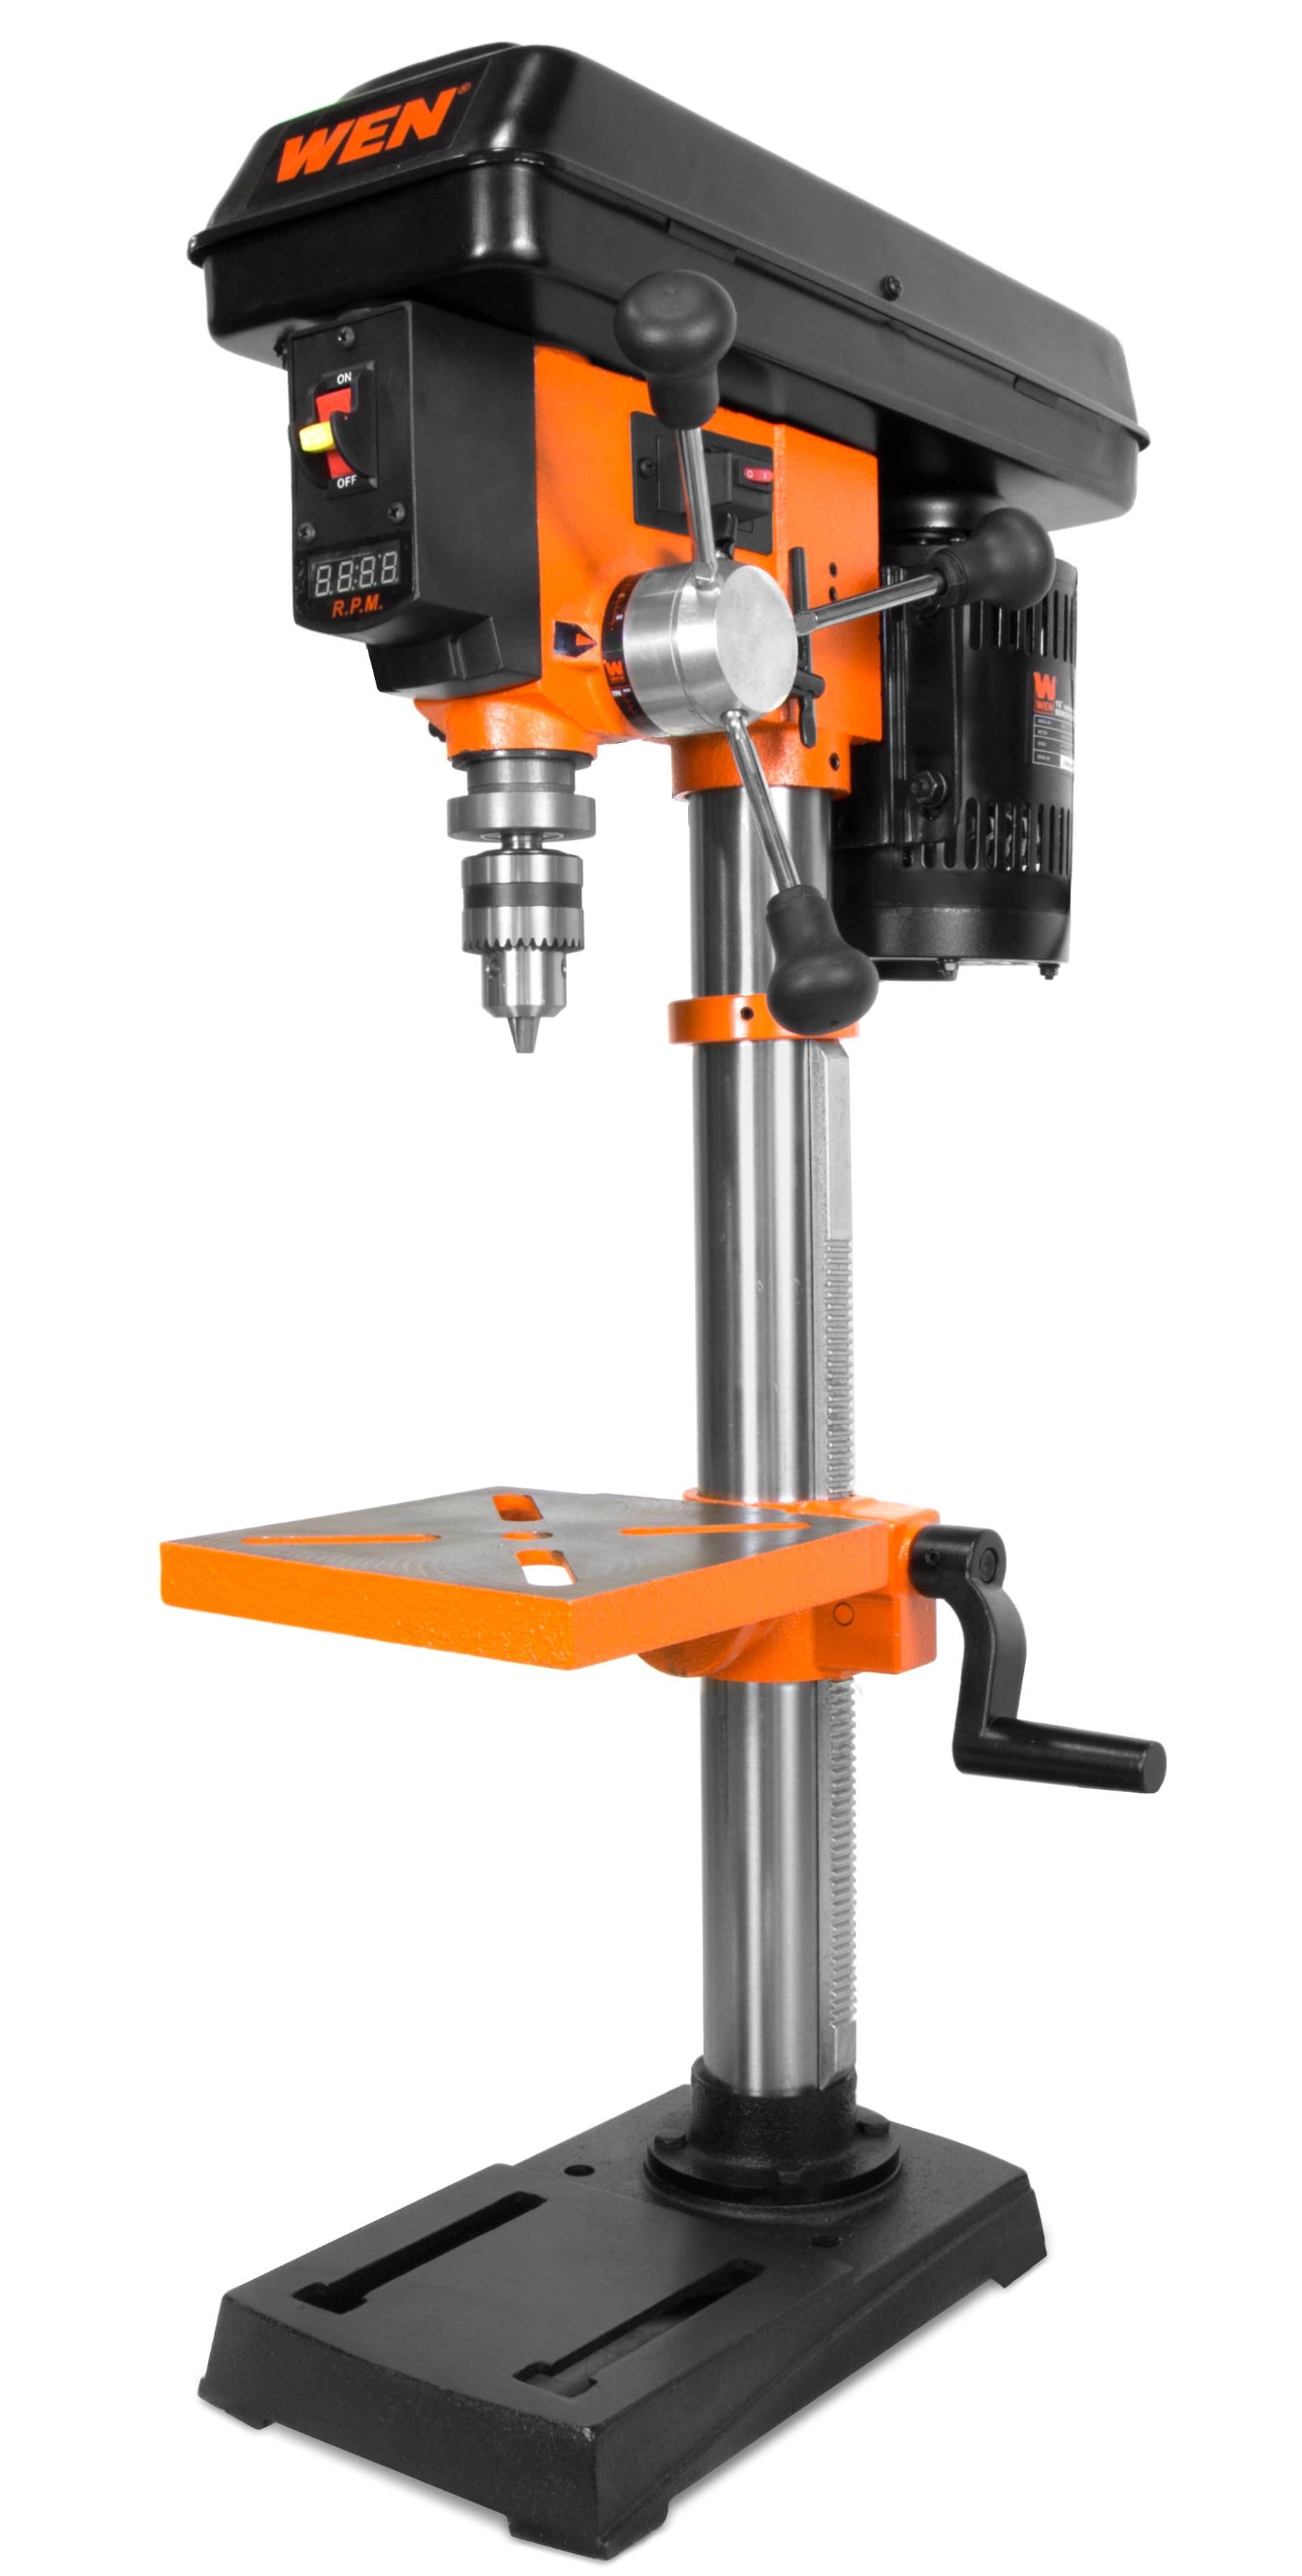 Universal Drill Stand for Hand Drill Adjustable Drill Press Bench Clamp Drill Press Stand Workbench Repair Tool Double Hole Aluminum Heavy-Duty Base